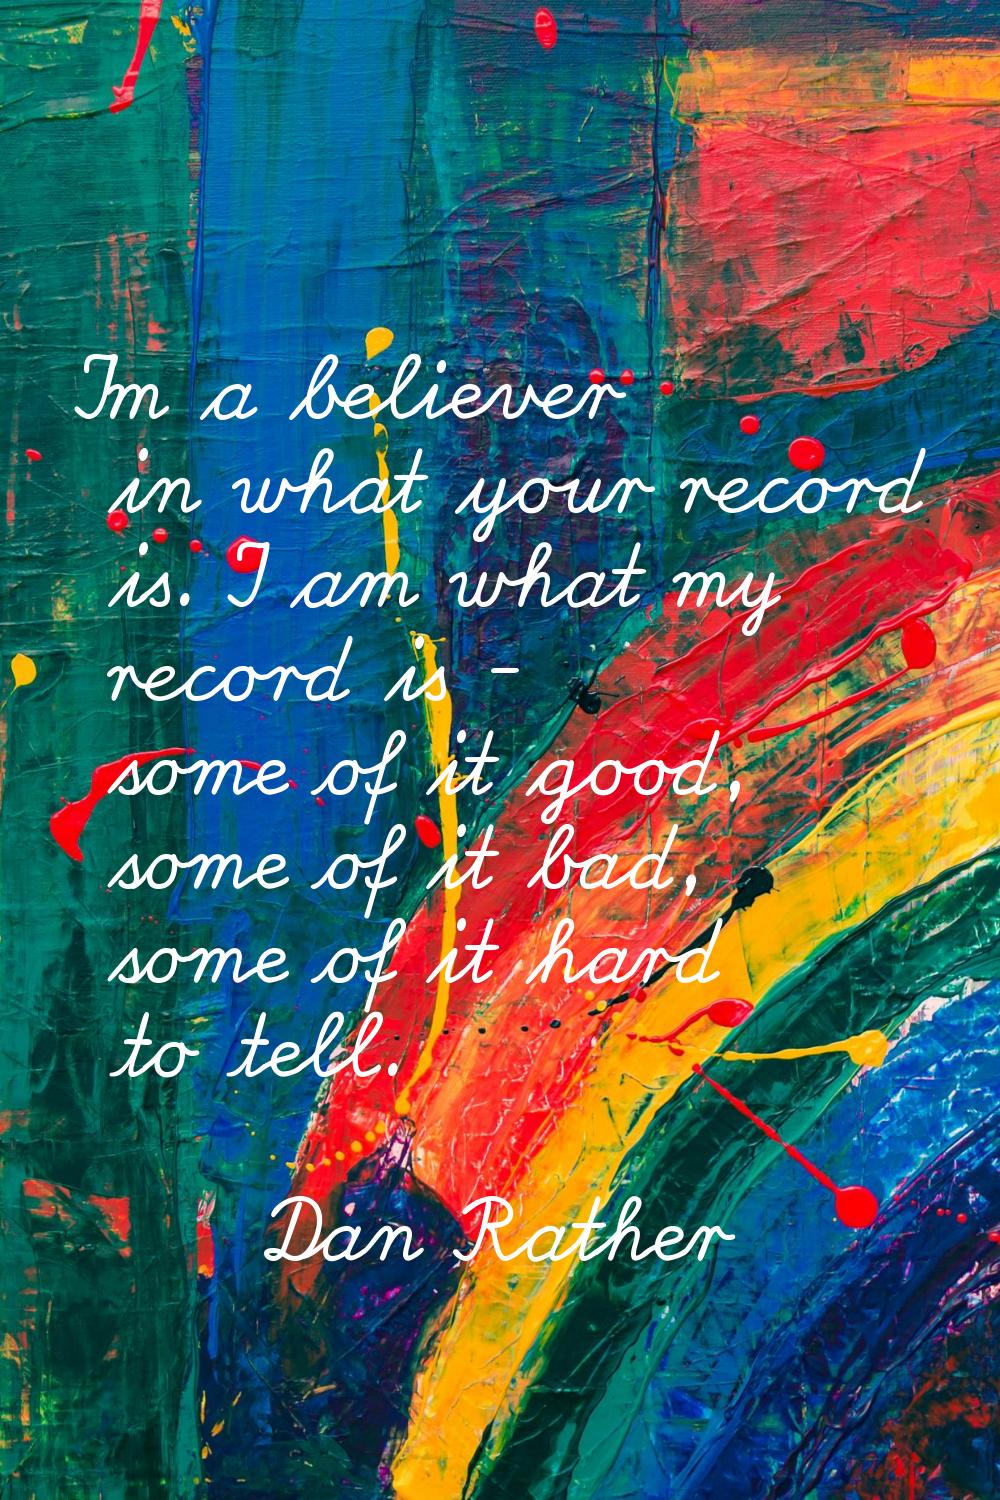 I'm a believer in what your record is. I am what my record is - some of it good, some of it bad, so